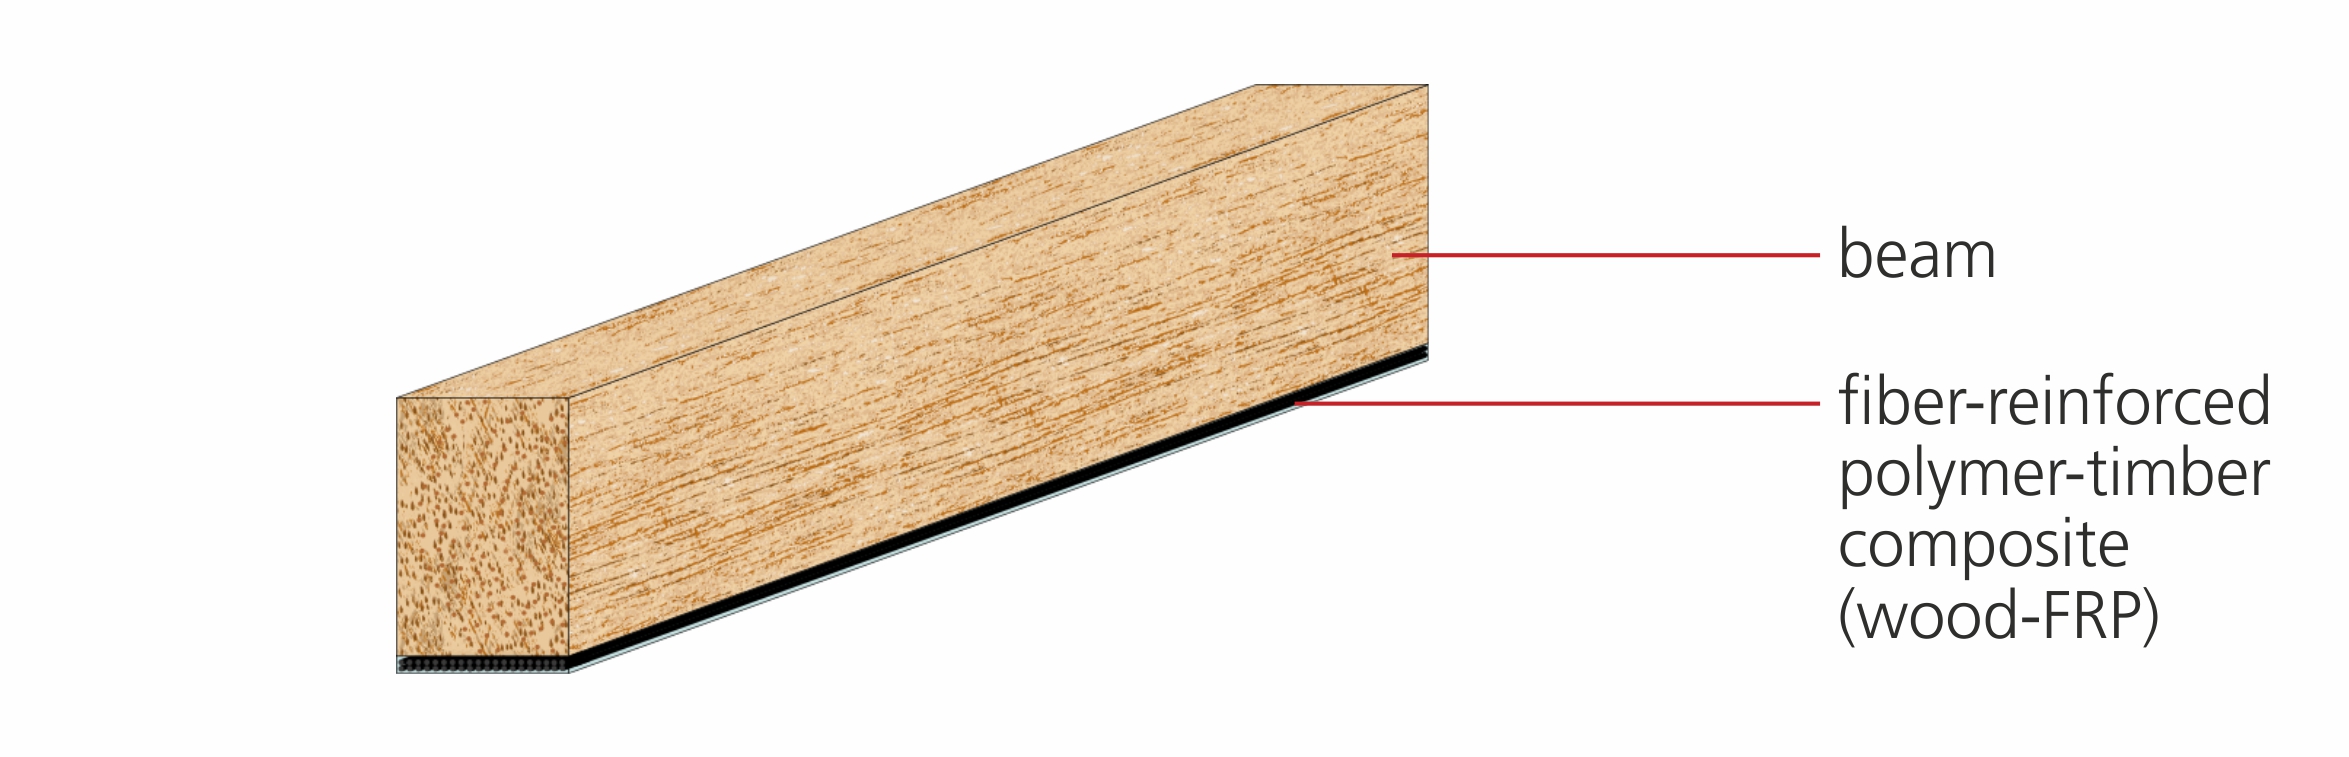 The computer graphic shows a wooden beam. On the underside of the beam there is a thin black layer.